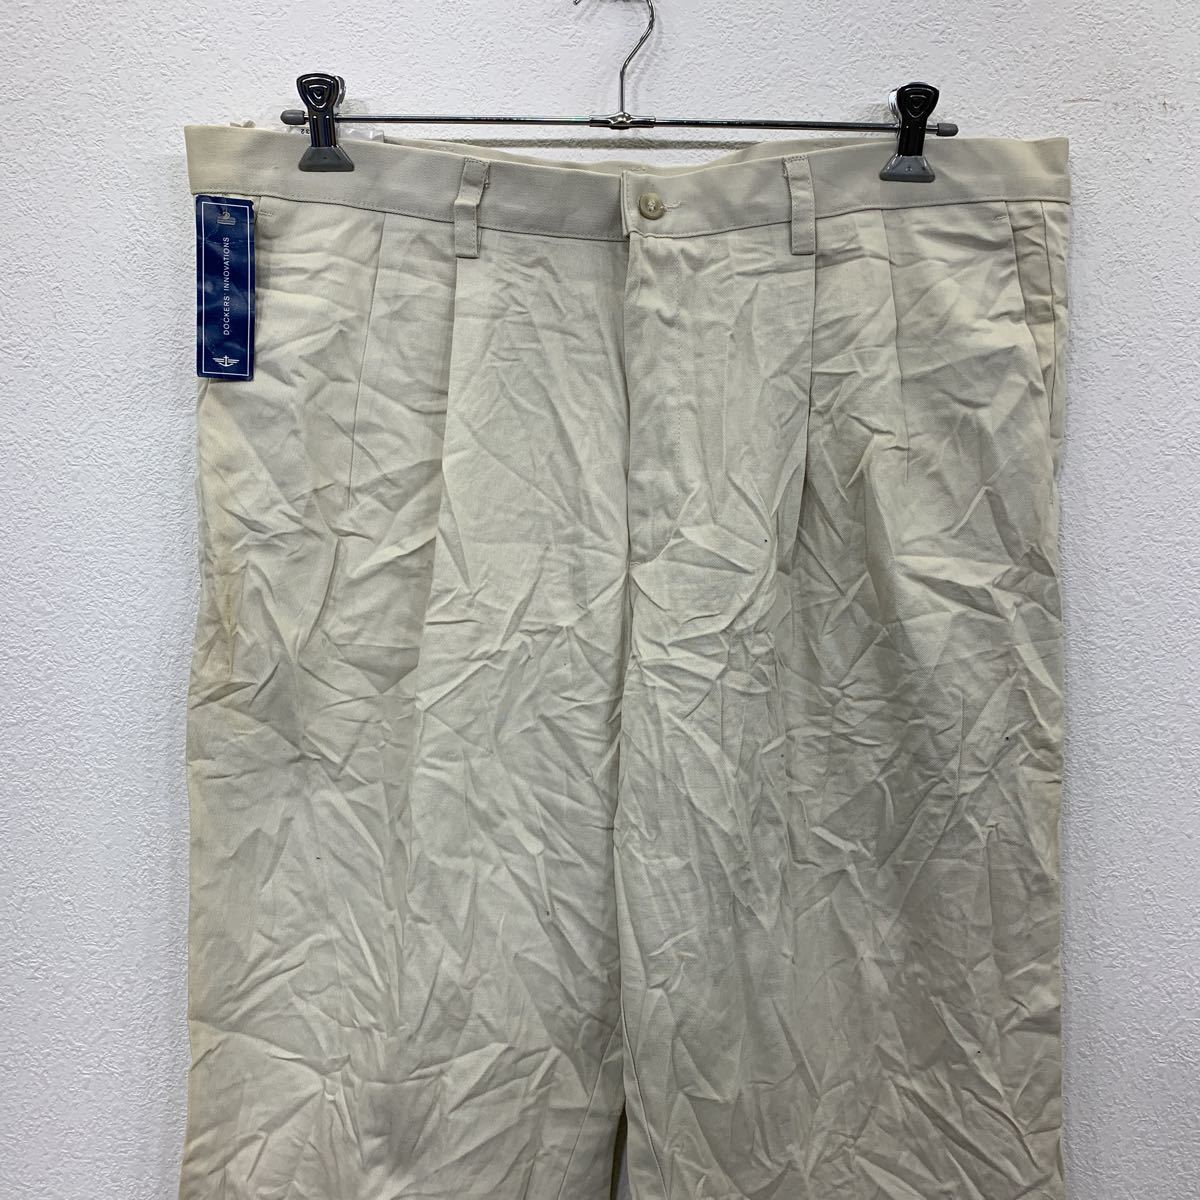 DOCKERS chino pants W40 Docker's white big size dead stock old clothes . America buying up 2306-116